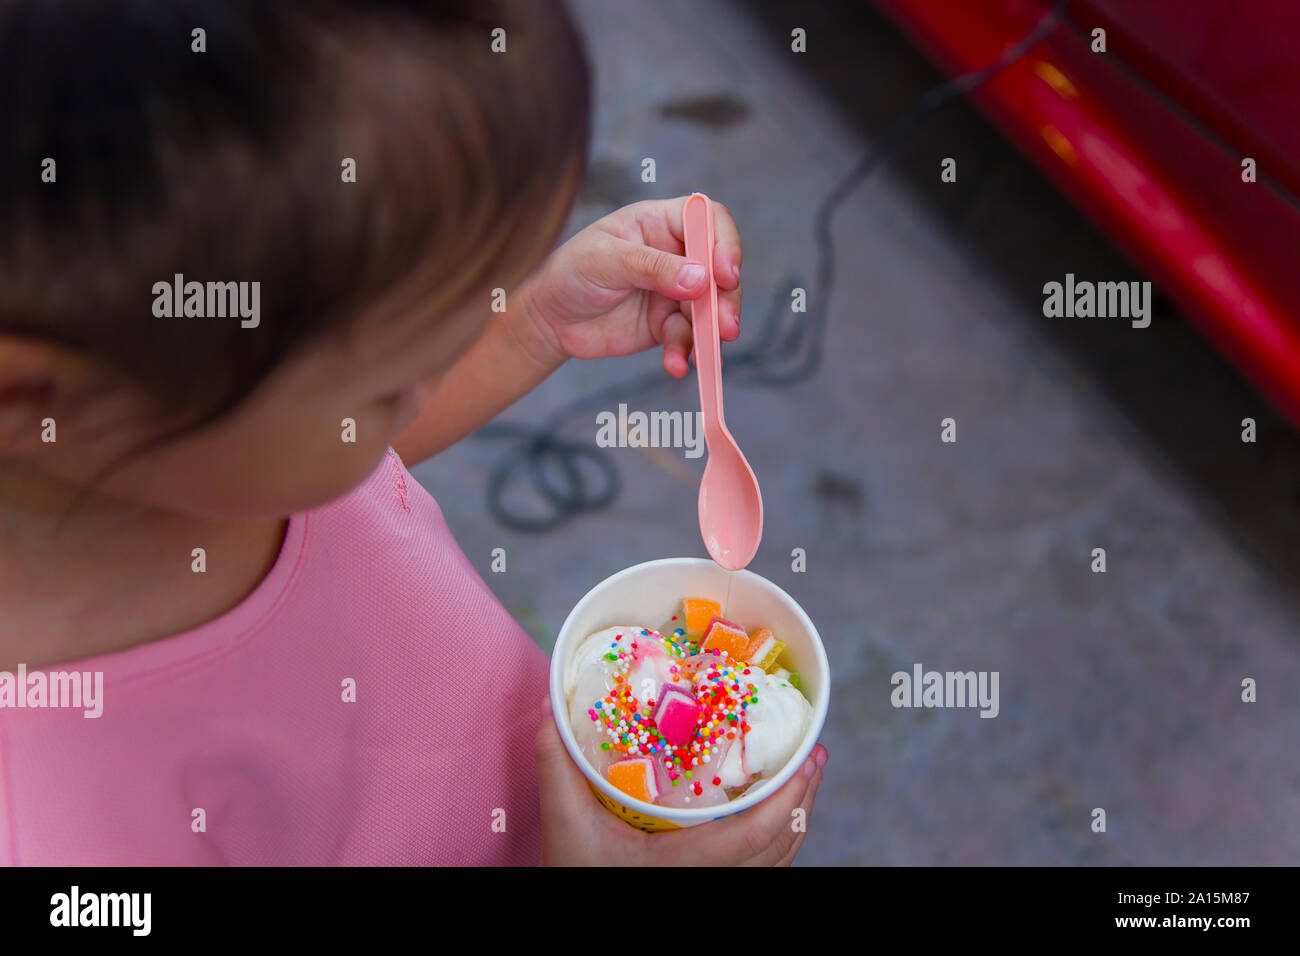 Thai/Asian cute little kids eating Ice cream in a cup or mango bar/candy.  High resolution image gallery. Stock Photo